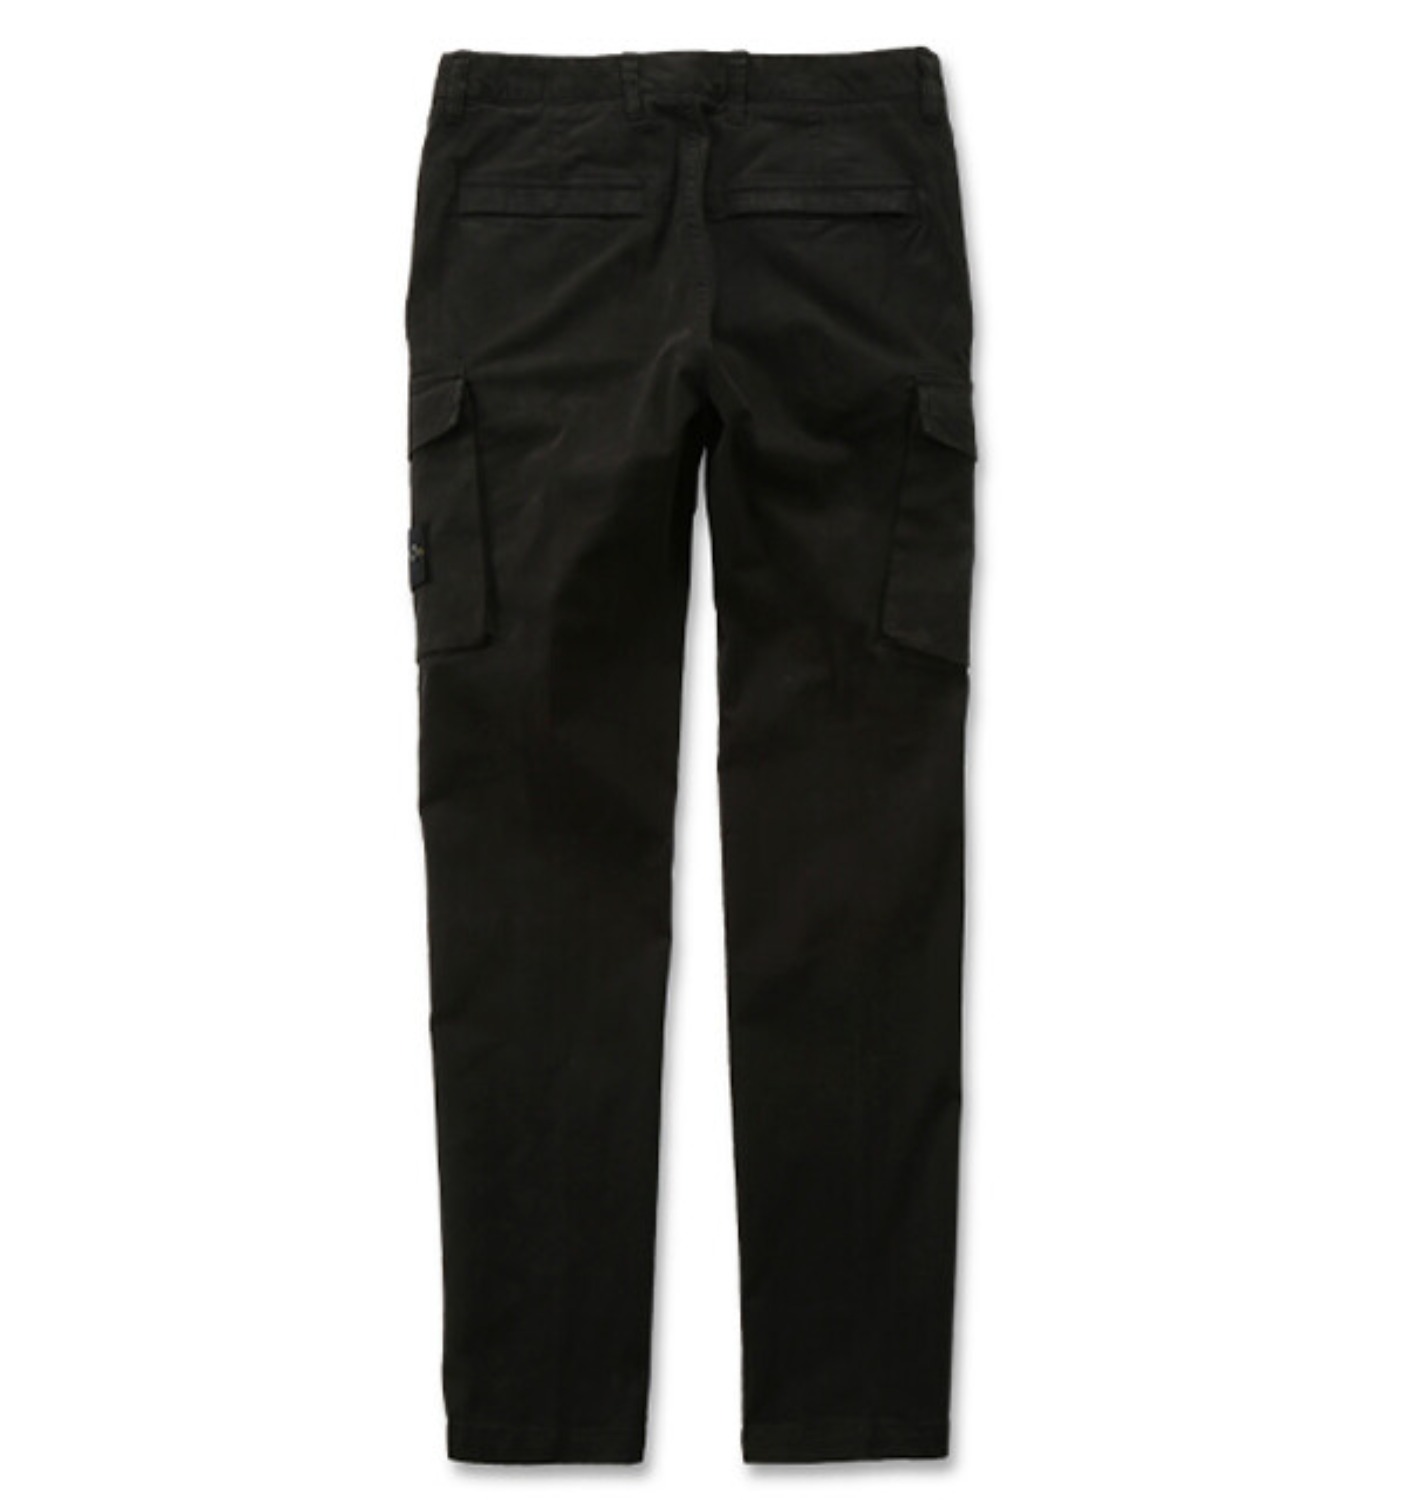 STRETCH BROKEN TWILL COTTON GARMENT DYED OLD EFFECT CARGO PANTS BLACK